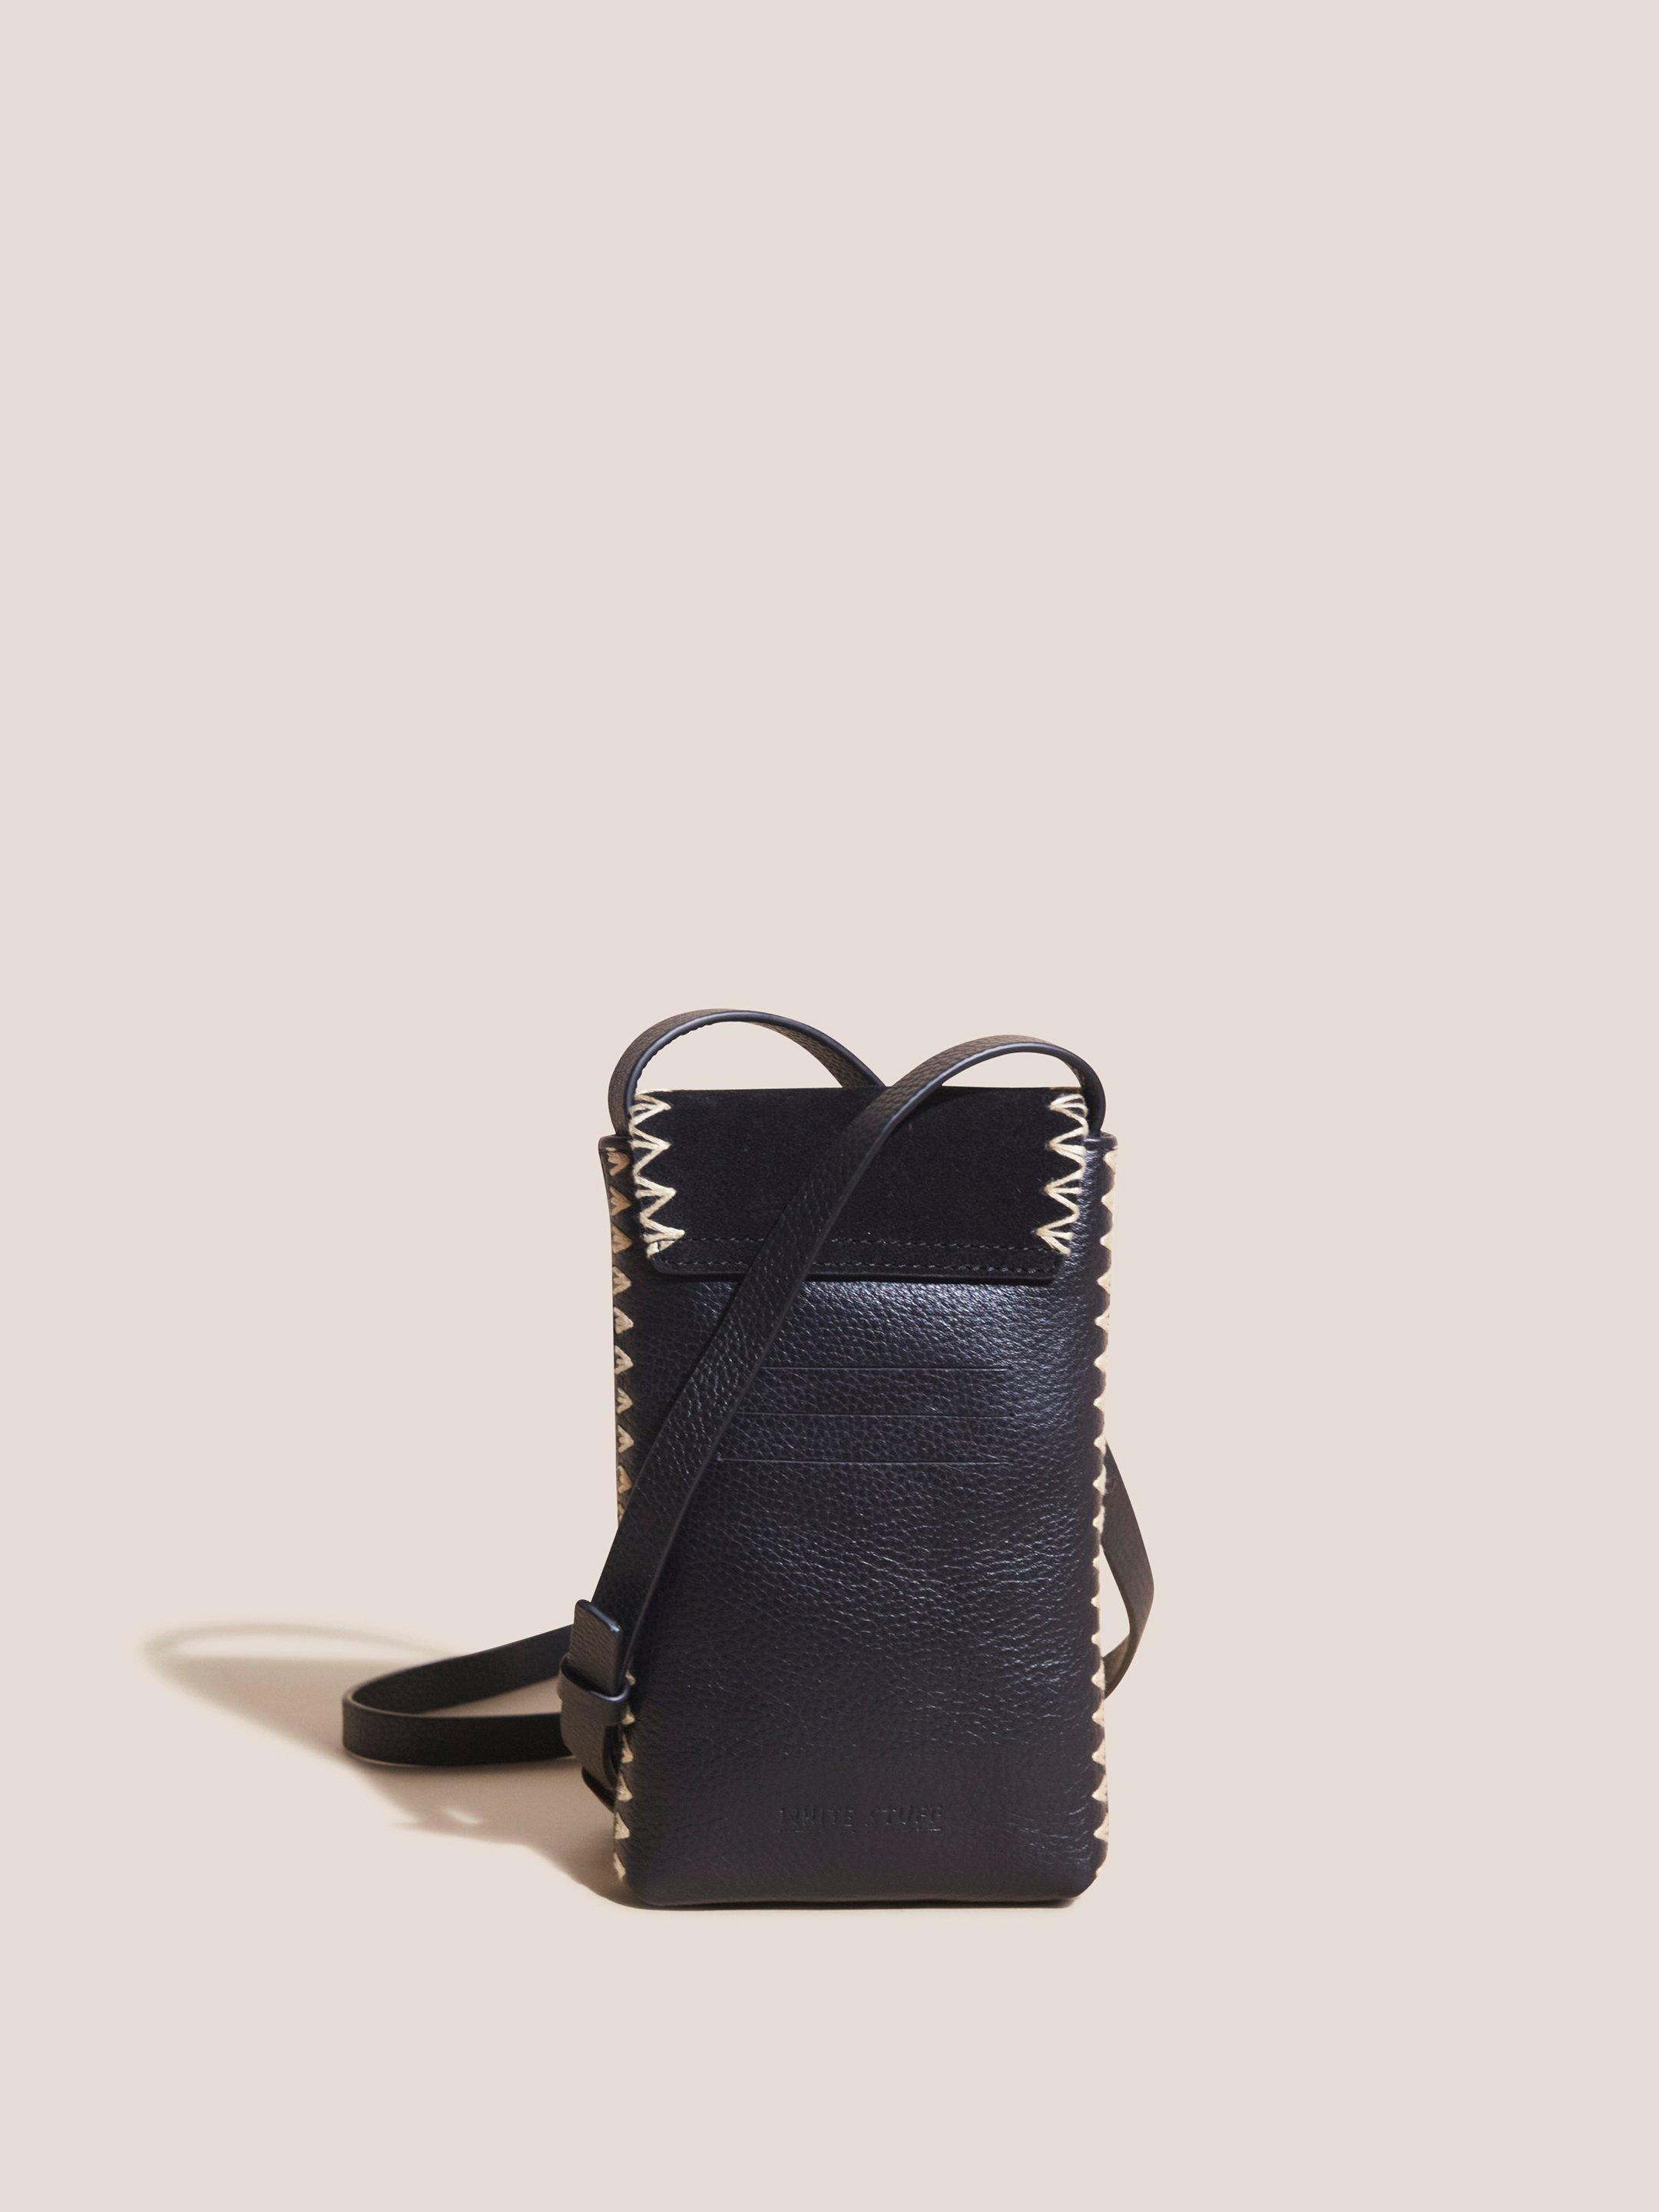 Craft Leather Phone Bag in PURE BLK - FLAT BACK